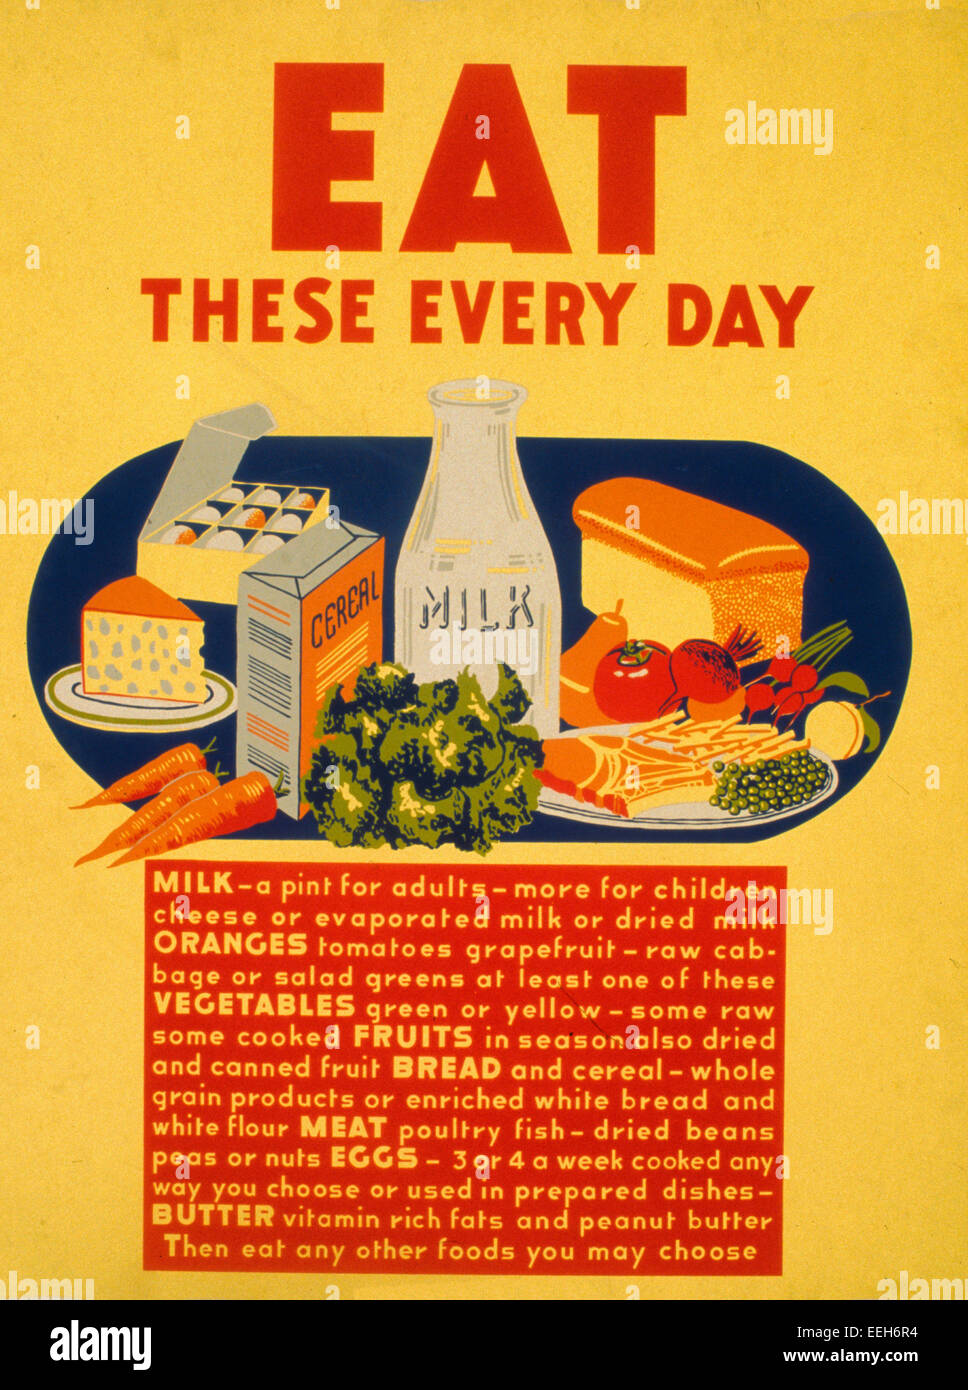 Eat these every day -  Poster promoting consumption of healthy foods, showing dairy products (milk, cheese), eggs, fruit, vegetables, bread and cereal, and meat, circa 1942 Stock Photo